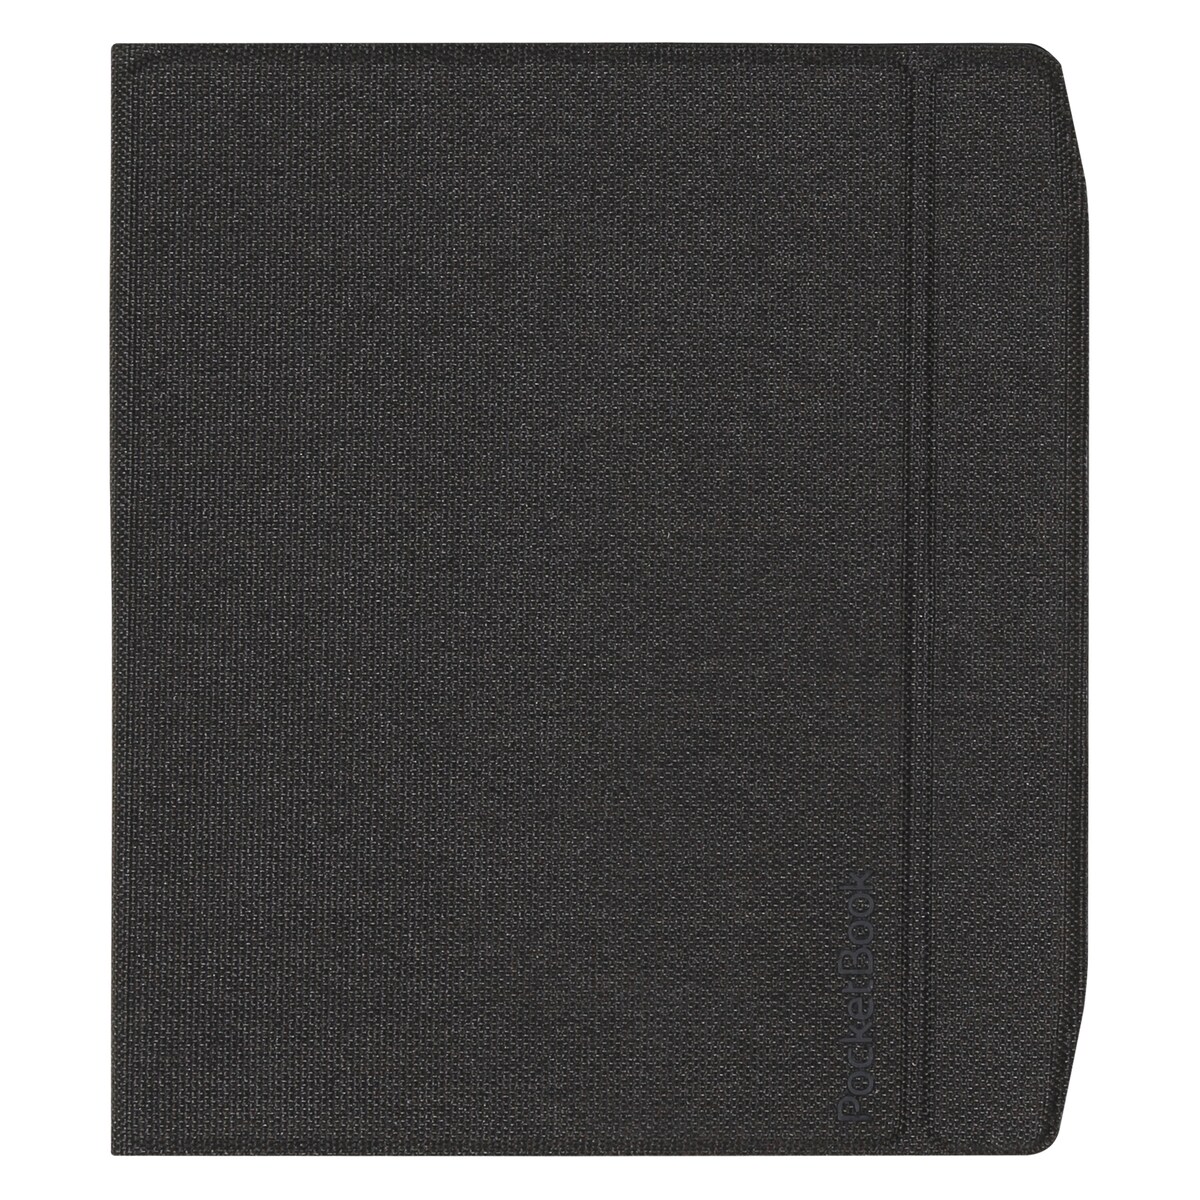 Pocketbook Charge Cover - Canvas Black 7"